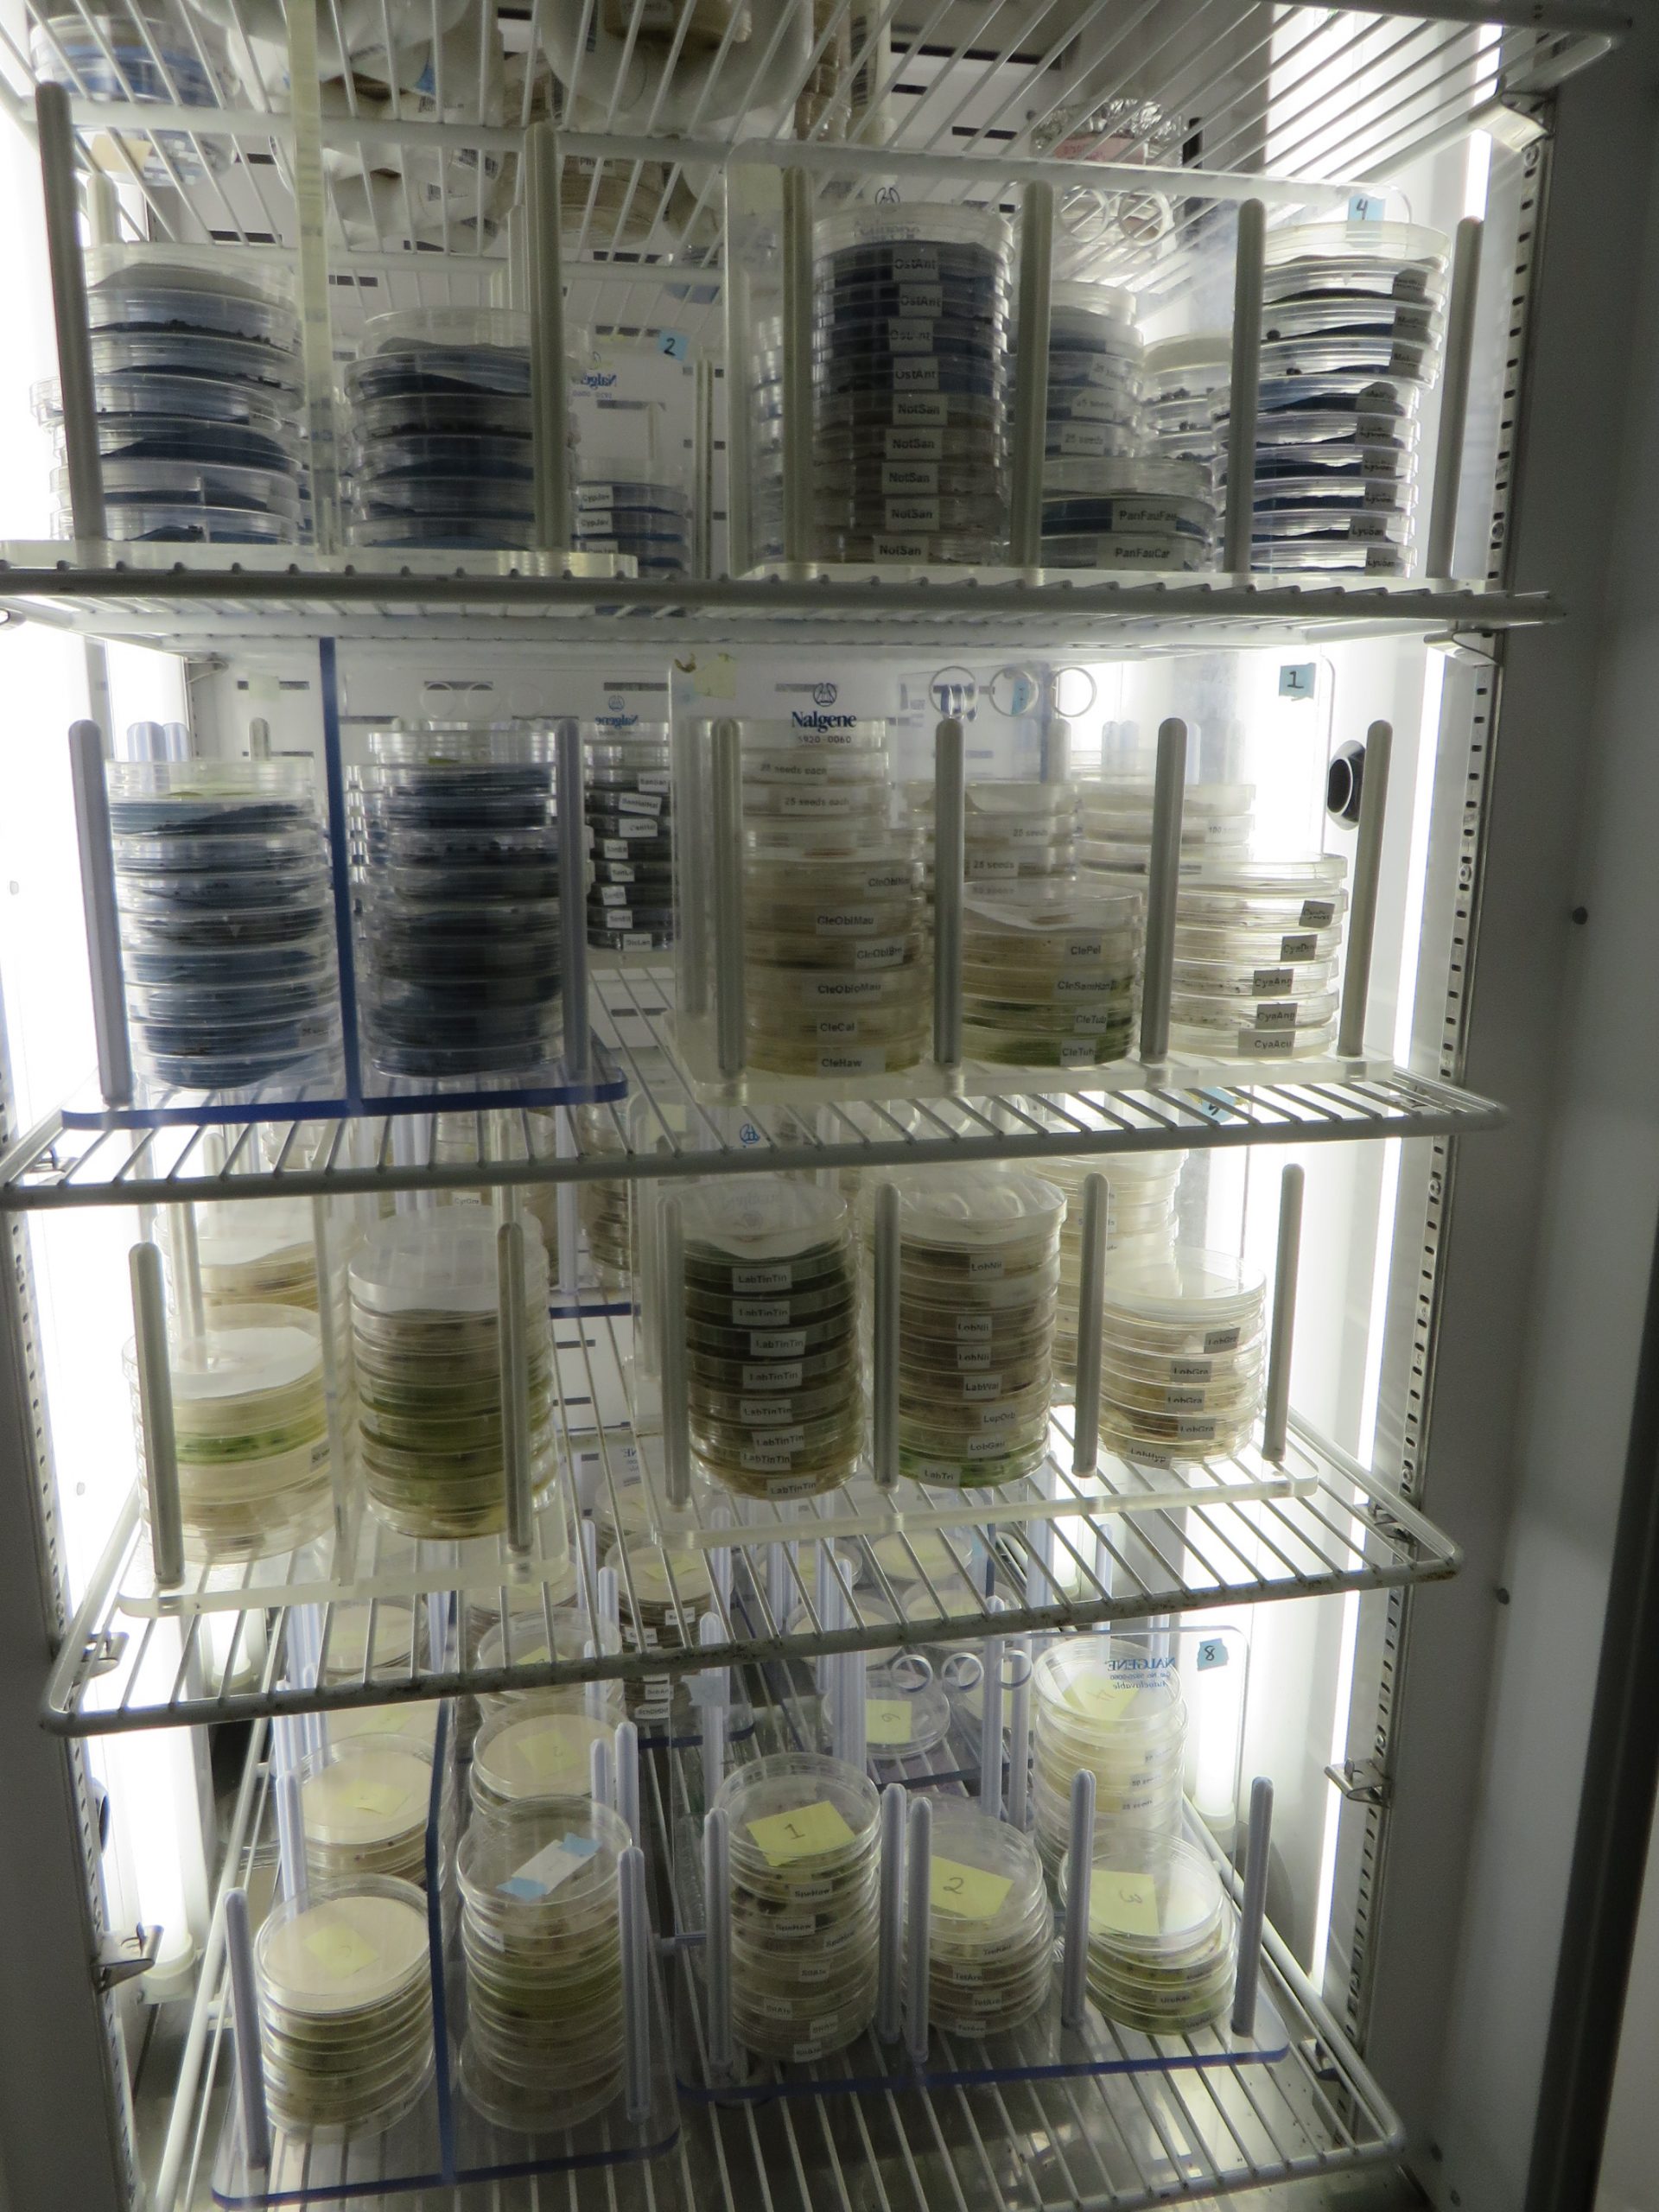 A germination chamber filled with round petri dishes with plated seed for germination testing.